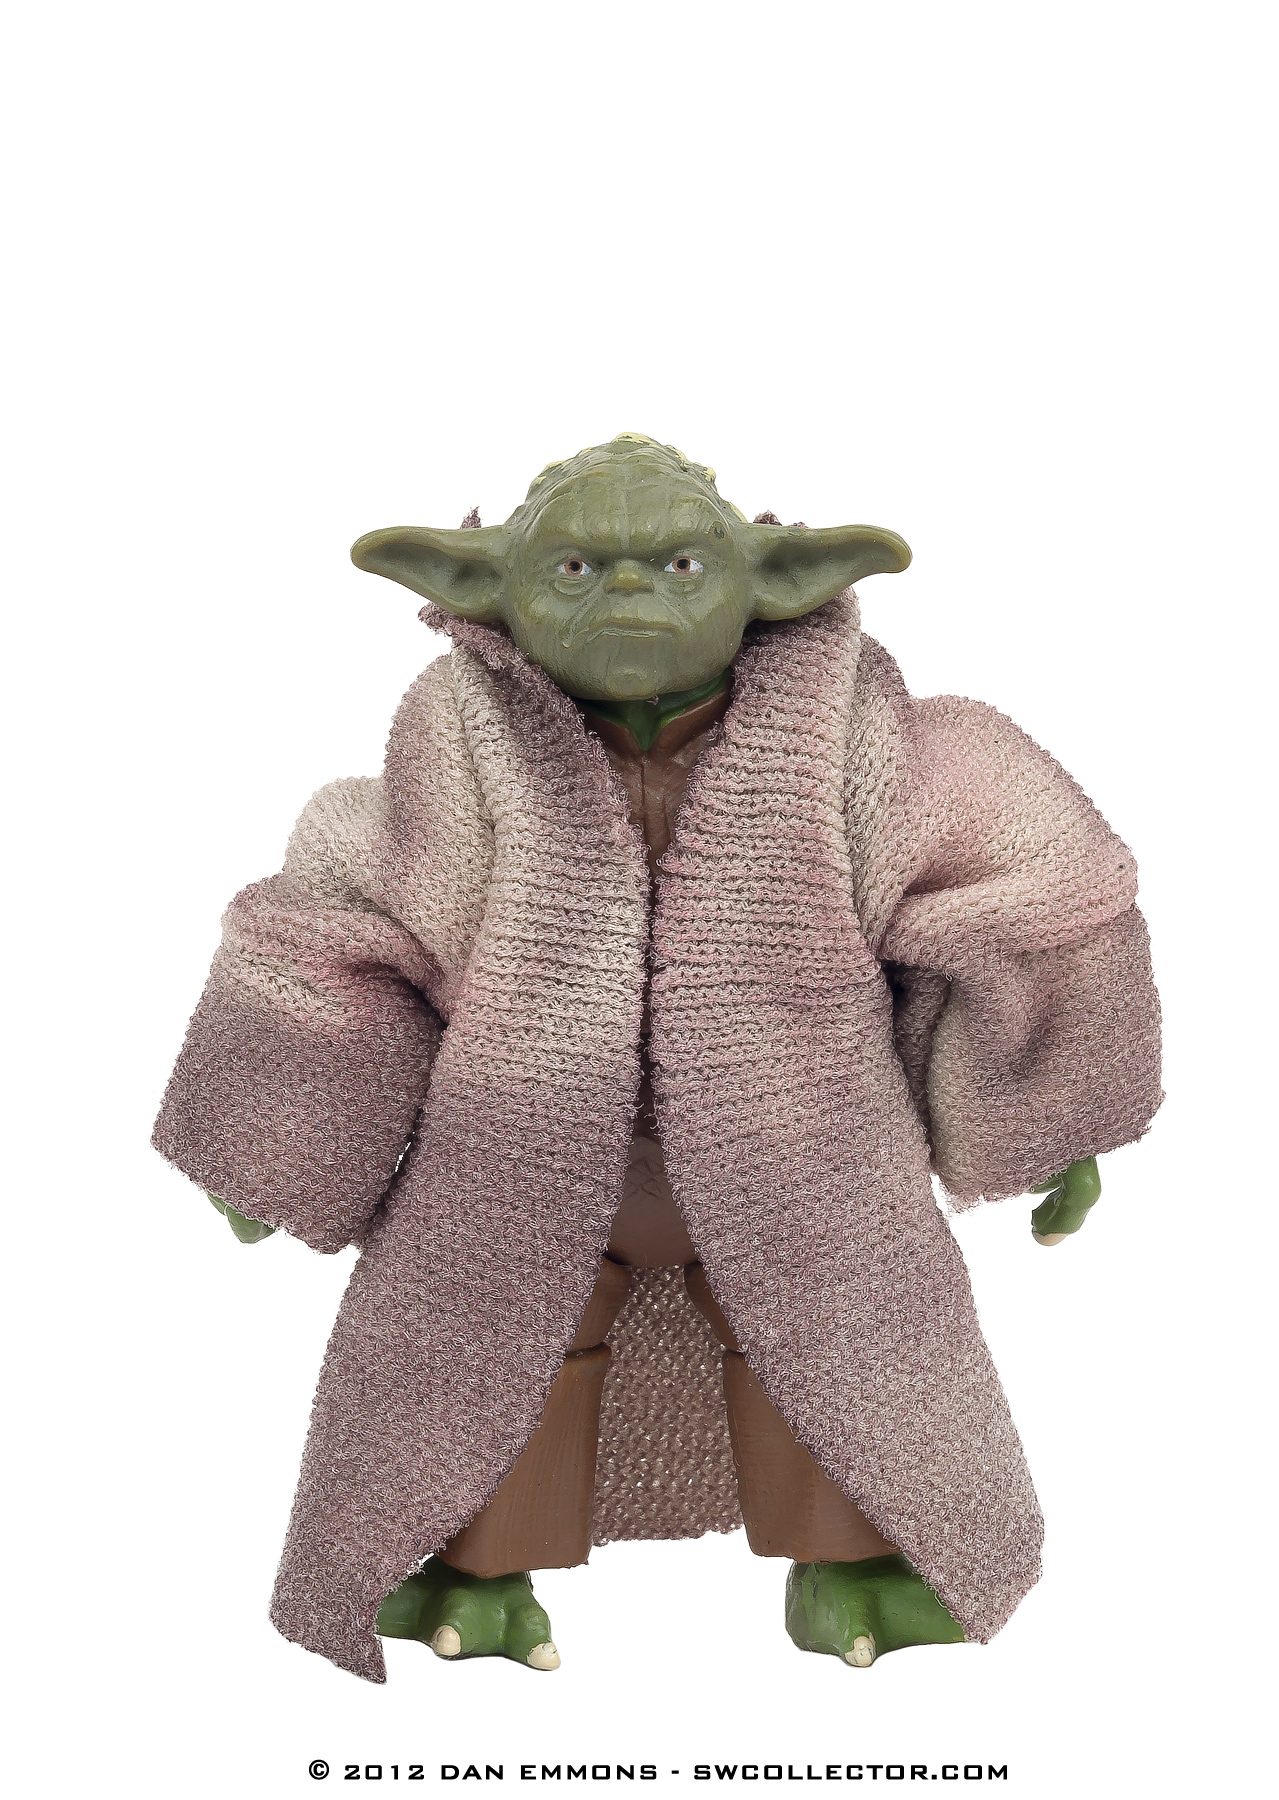 The Vintage Collection - VC20: Yoda - Variation - Very Dirty Cloak